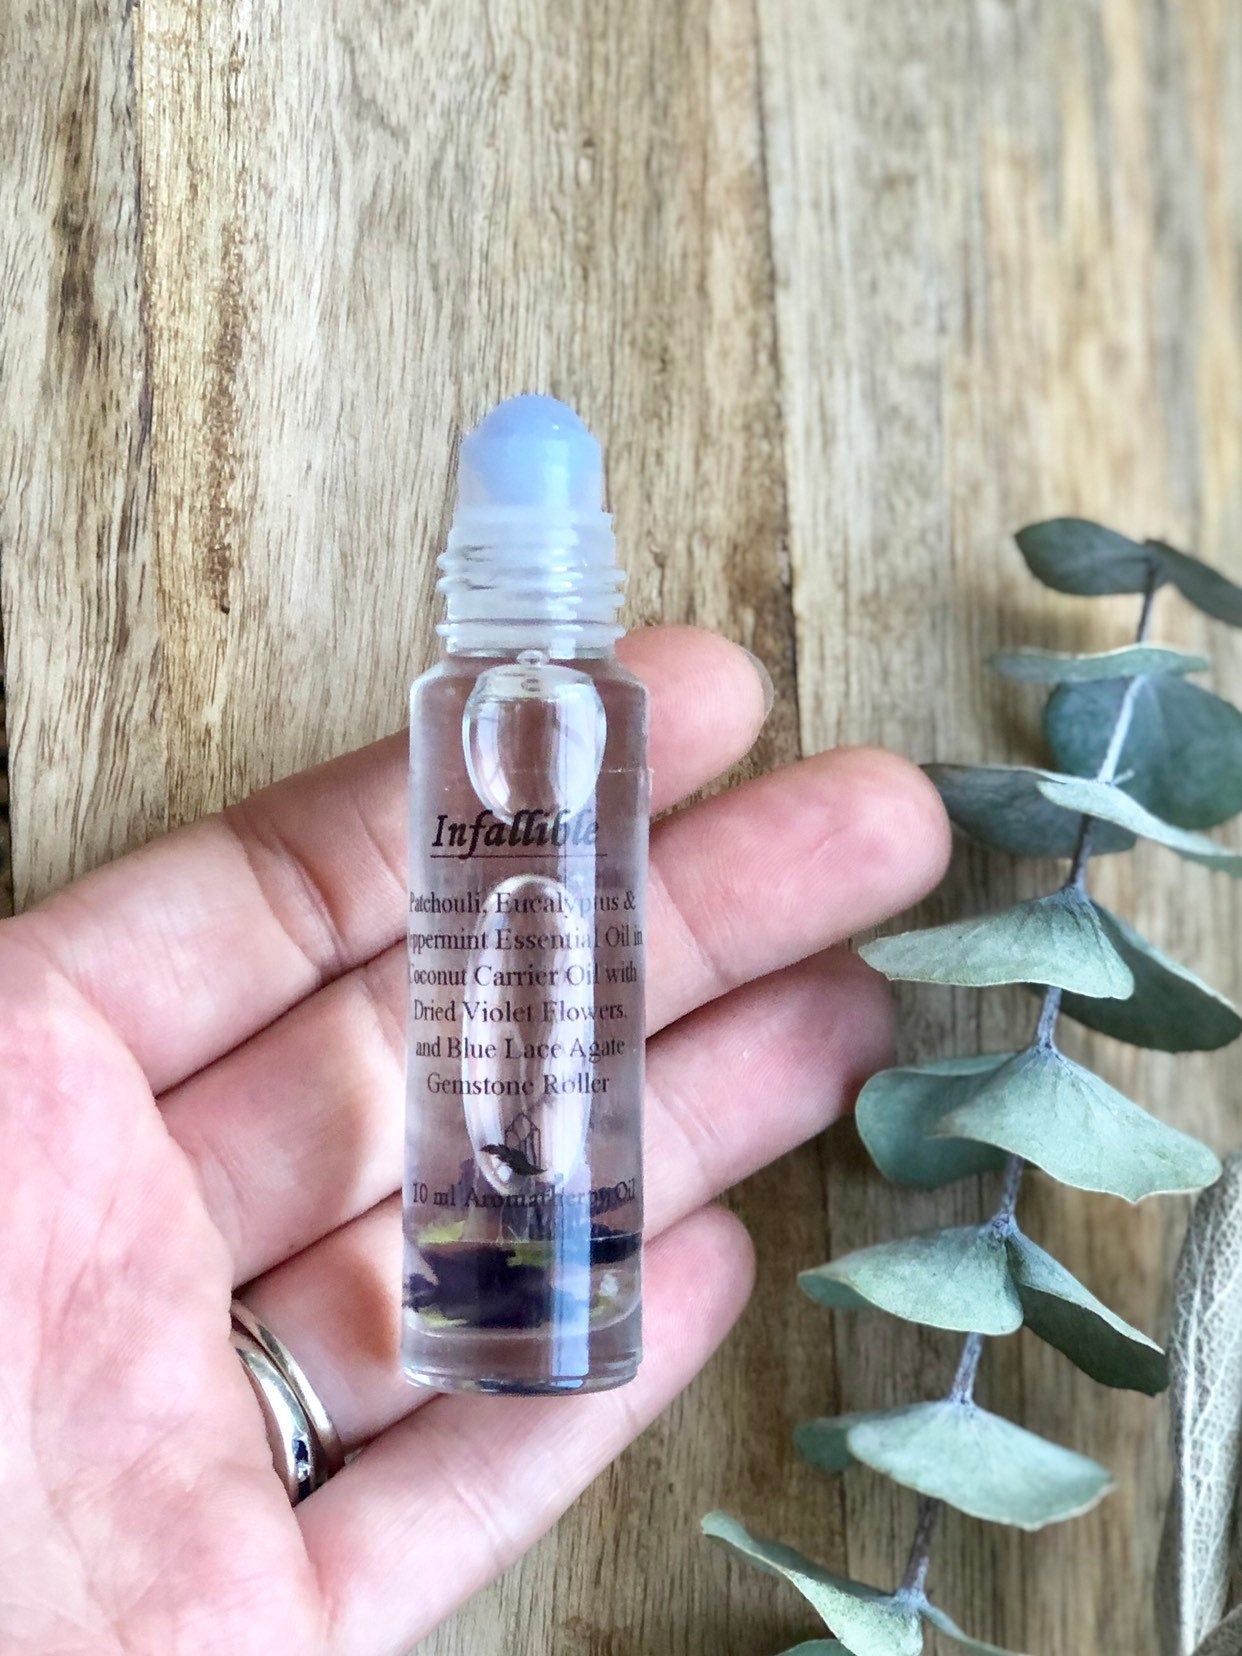 Custom Crystalline "Infallible" Essential Oil Roller - Patchouli, Eucalyptus and Peppermint with Sodalite Gemstone Roller